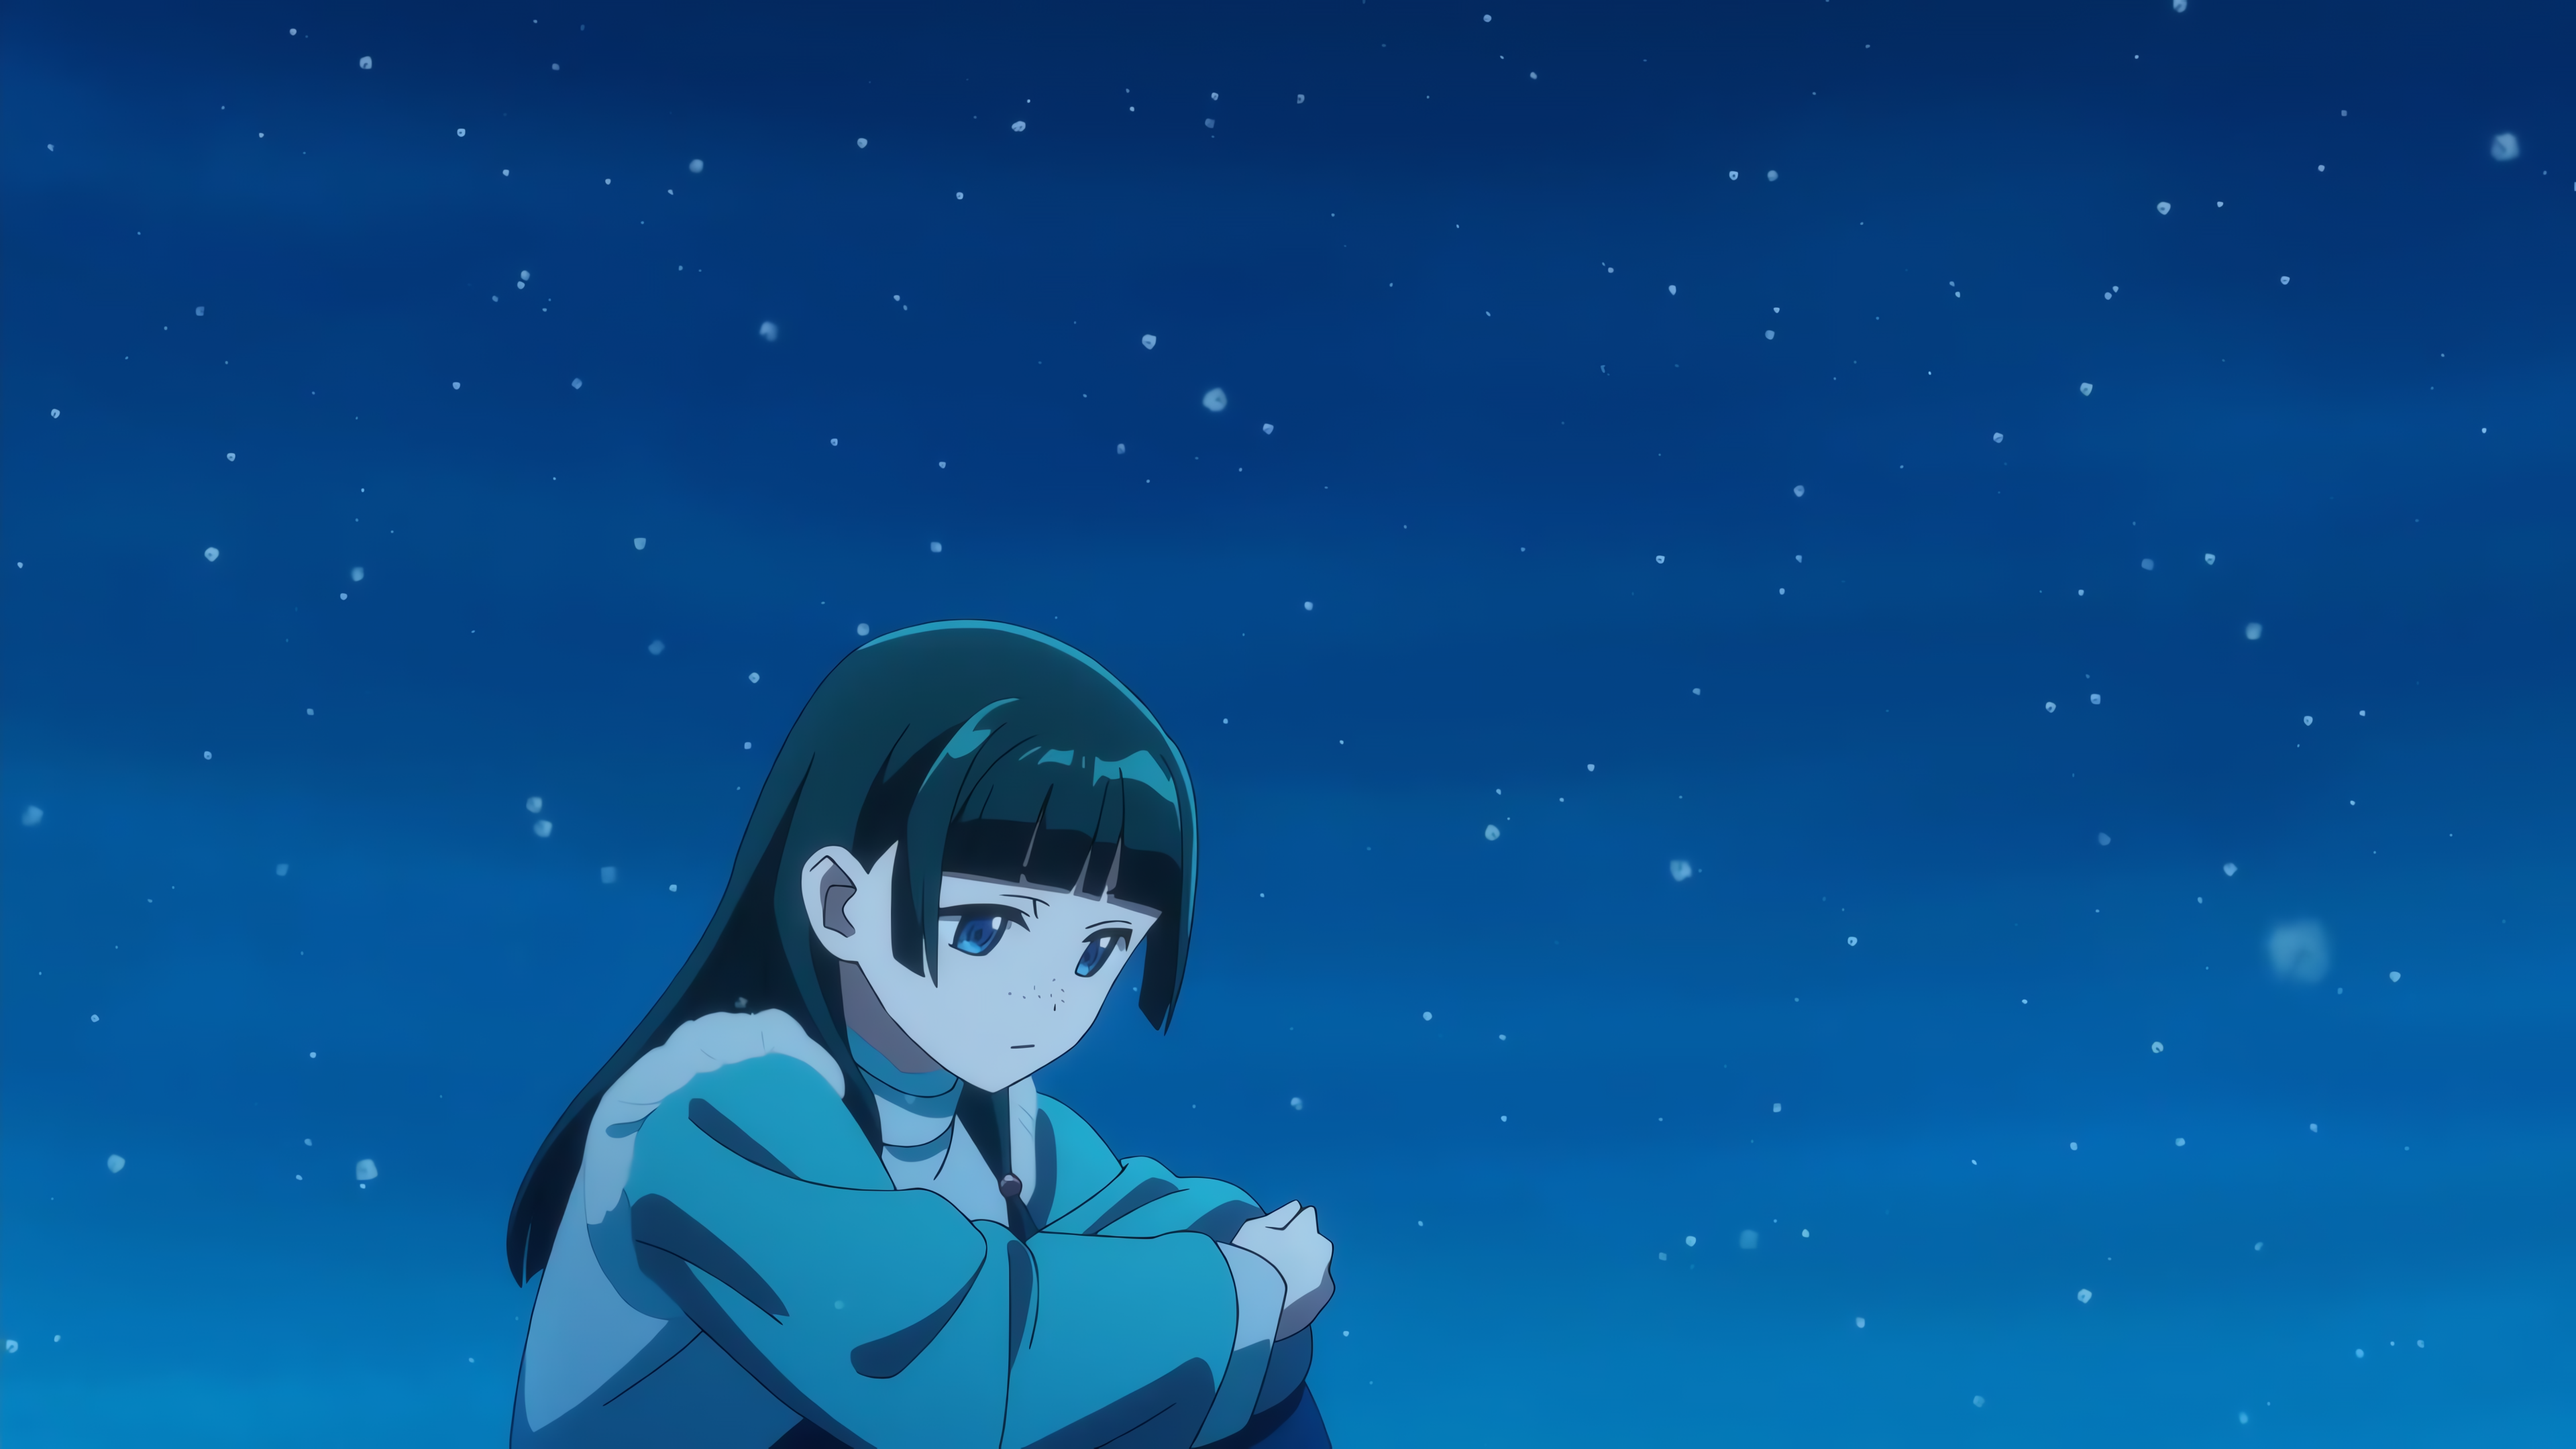 Anime 3840x2160 anime girls anime The Apothecary Diaries snow night green hair winter clothing Anime screenshot sitting outdoors women outdoors blunt bangs looking below sky stars freckles blue eyes long hair